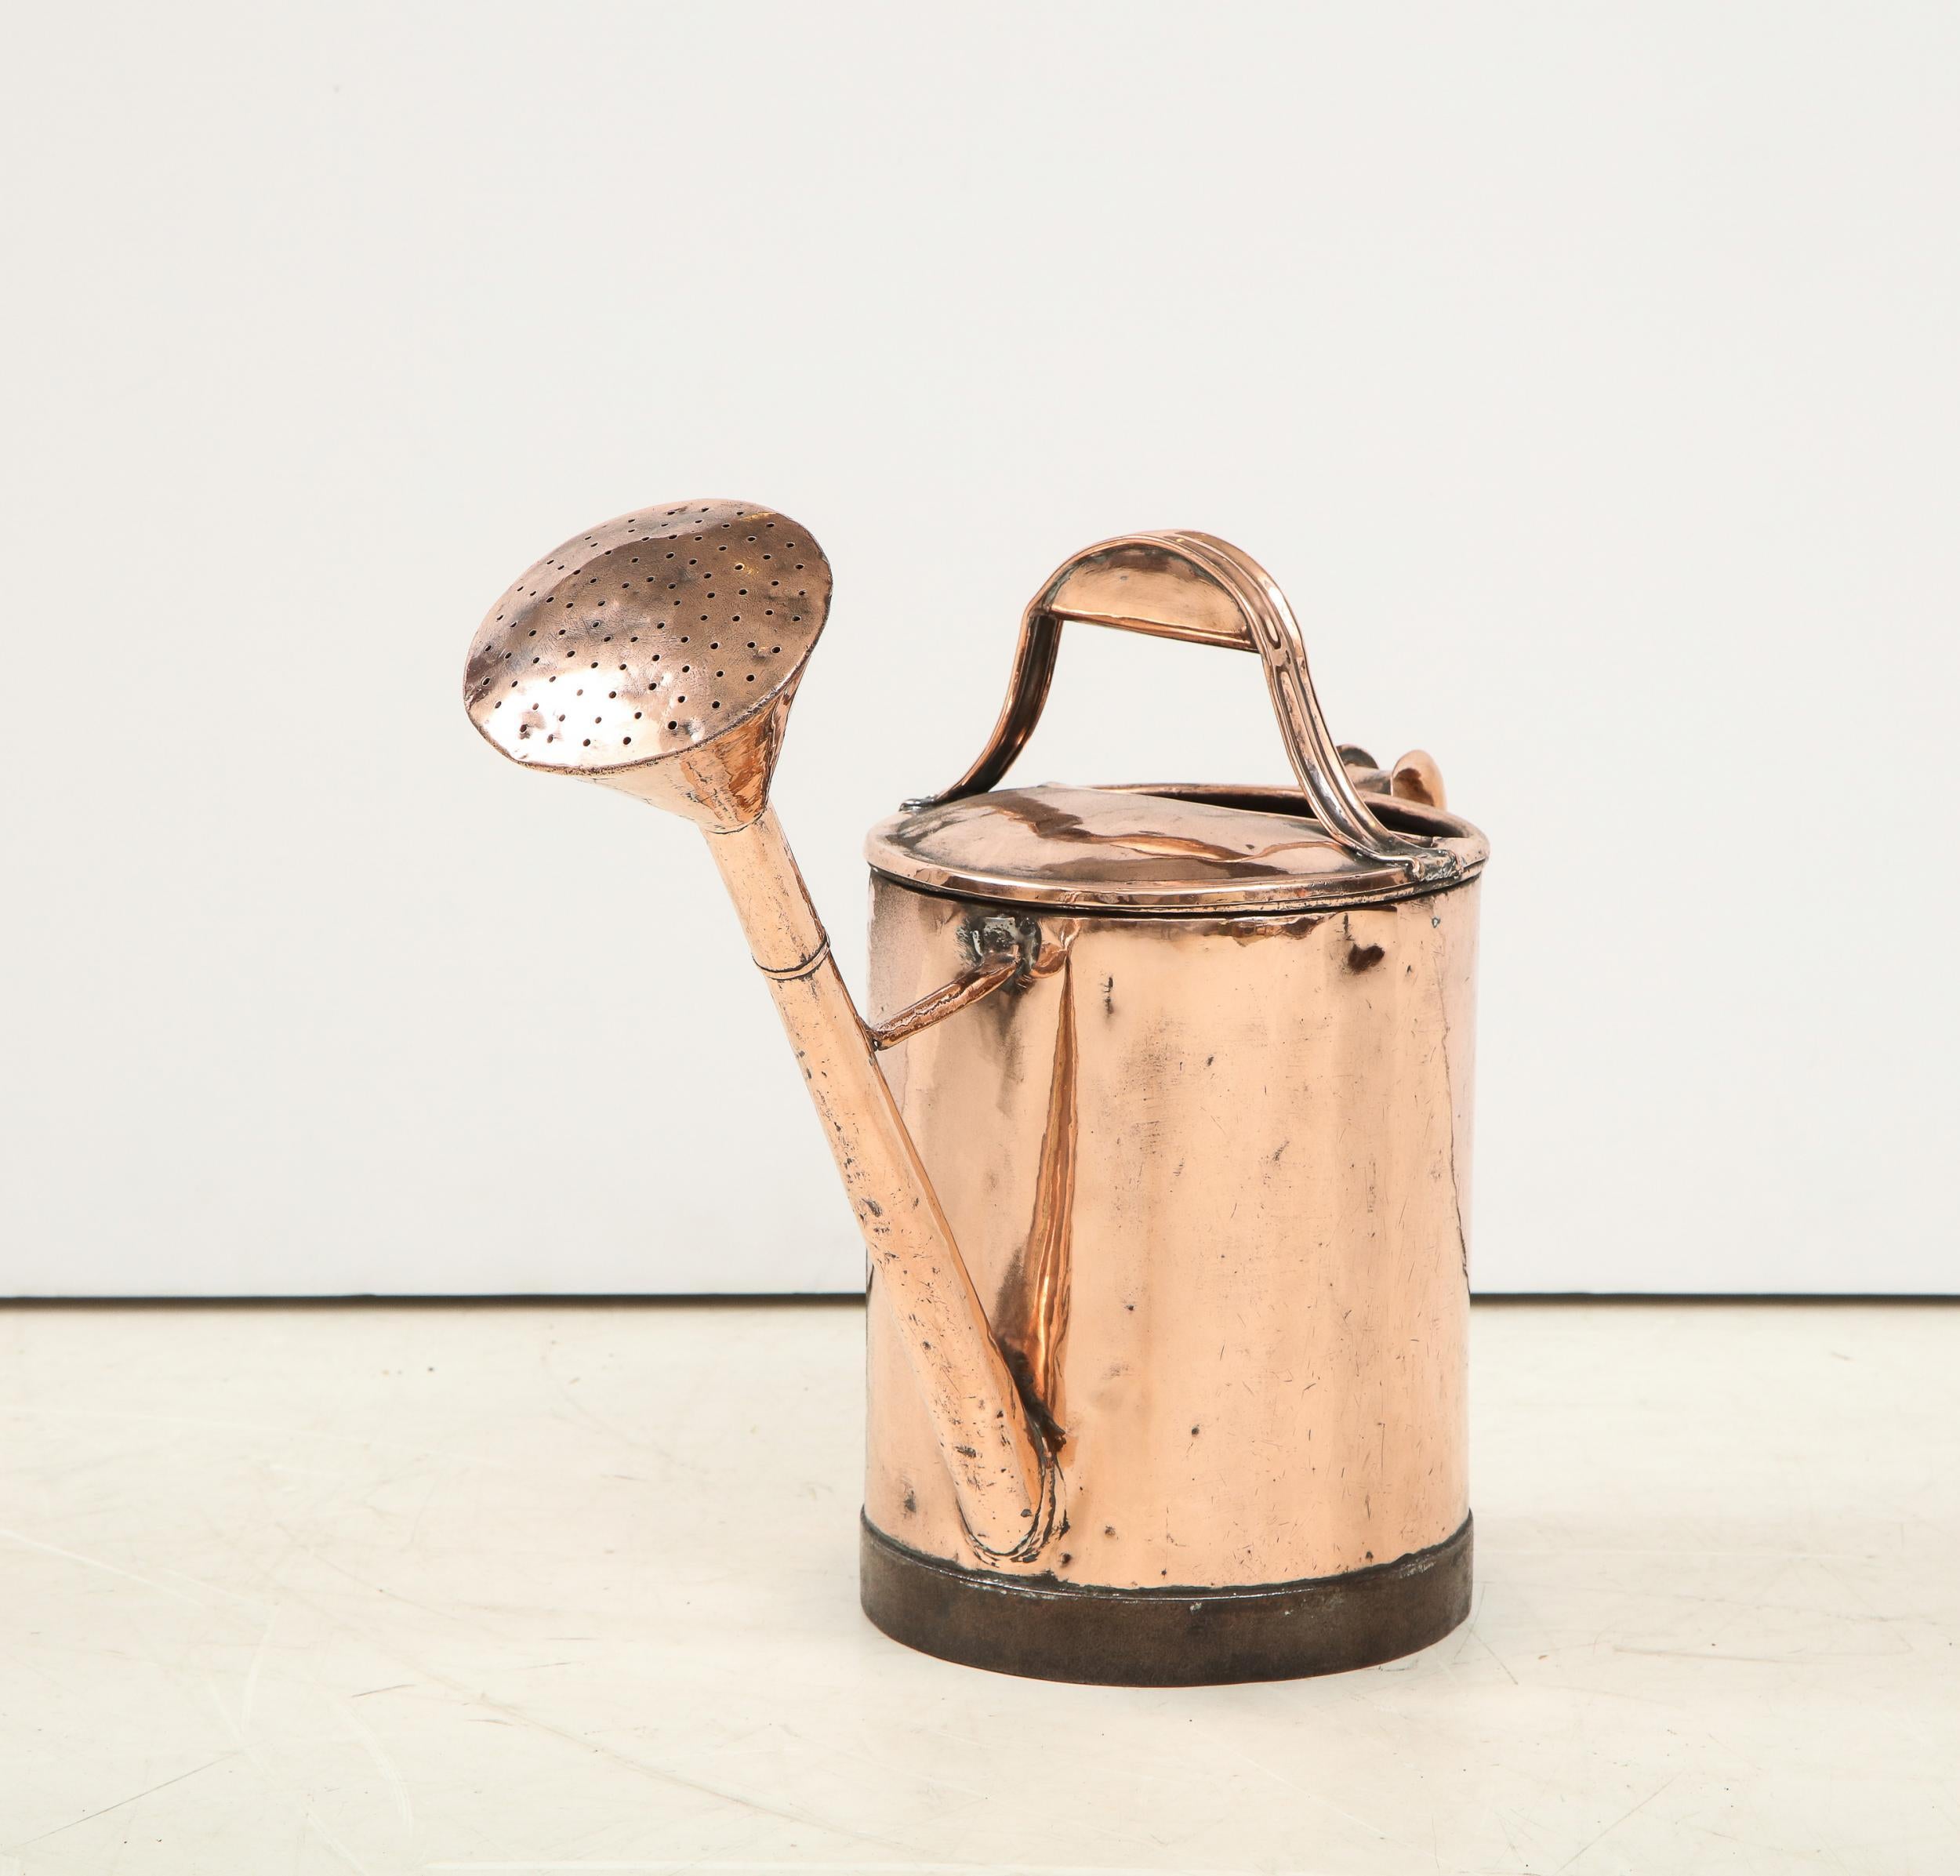 Good 19th century copper watering can of cylindrical form, having both a carrying and pouring handle, extended flower head and wrought iron reinforced base.